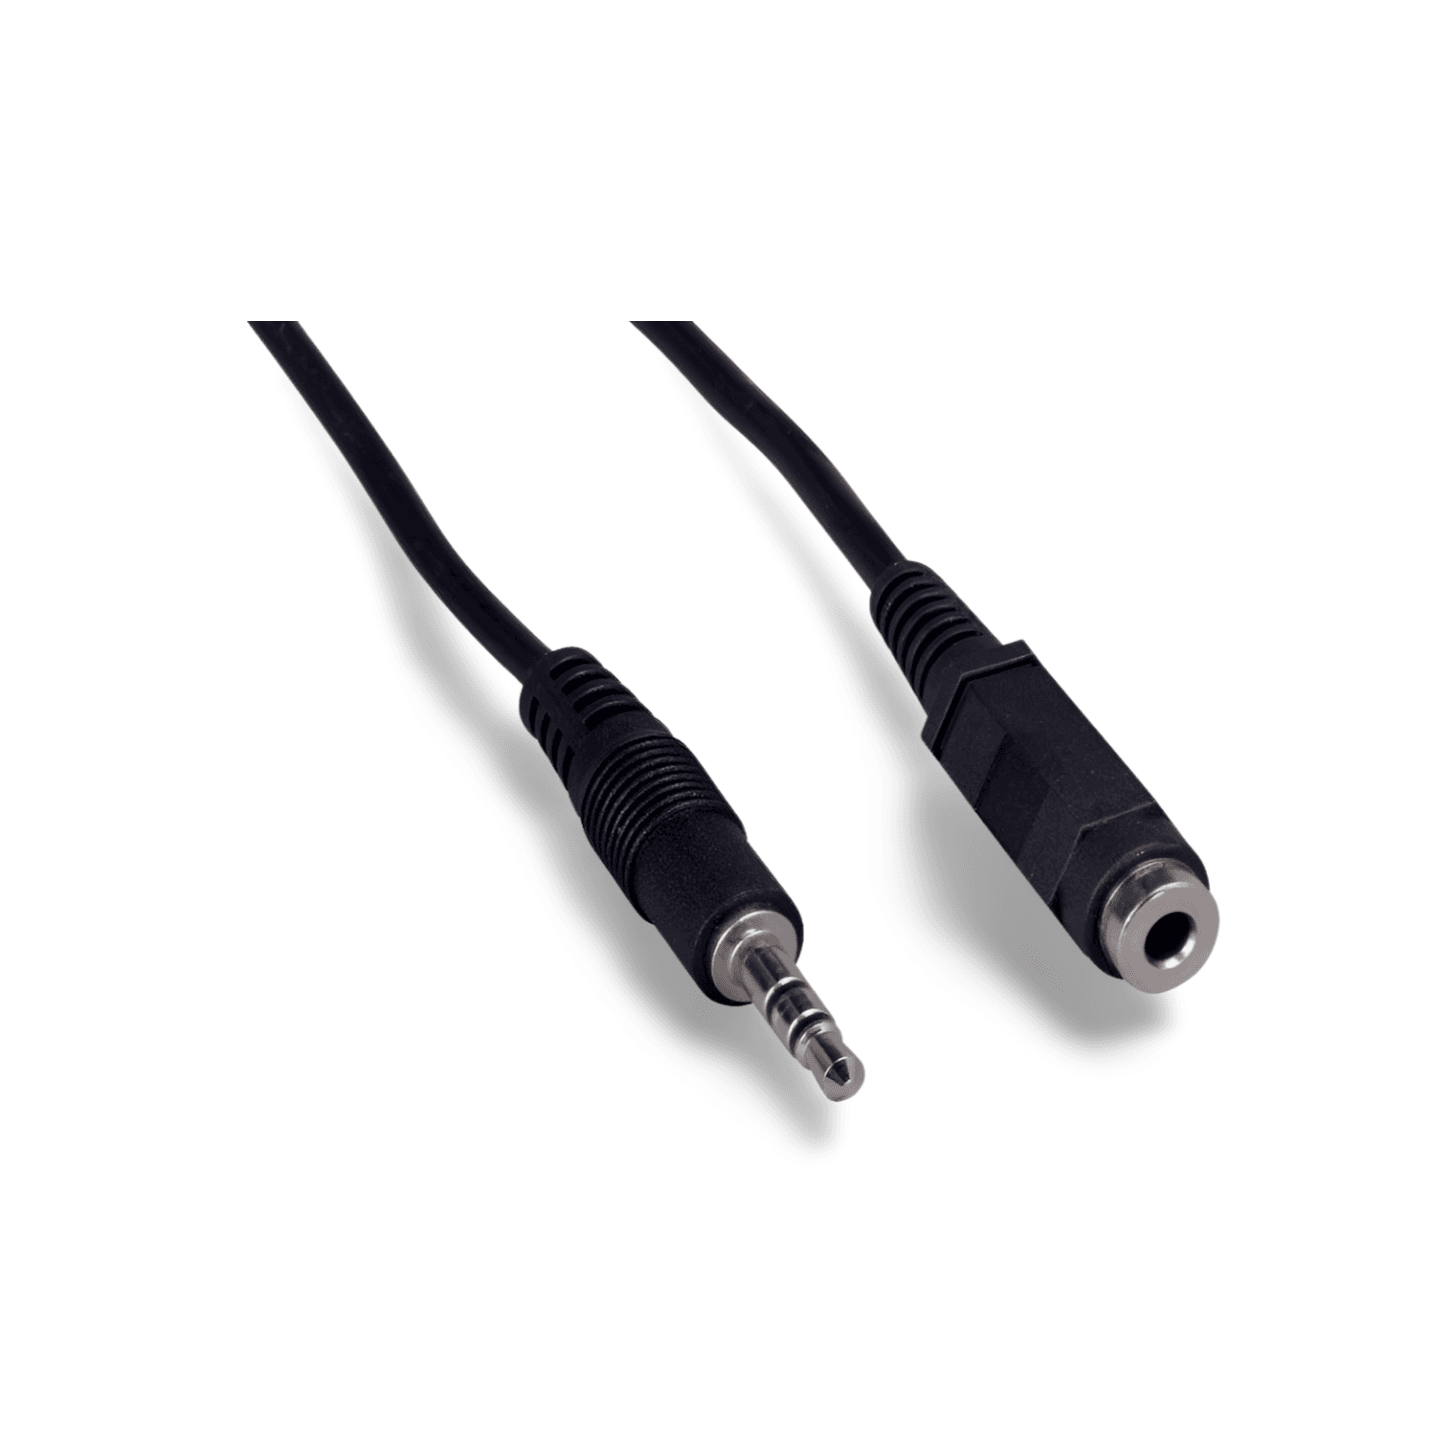 6ft Stereo Extension Cable 3.5mm Plug Jack Male to Female black